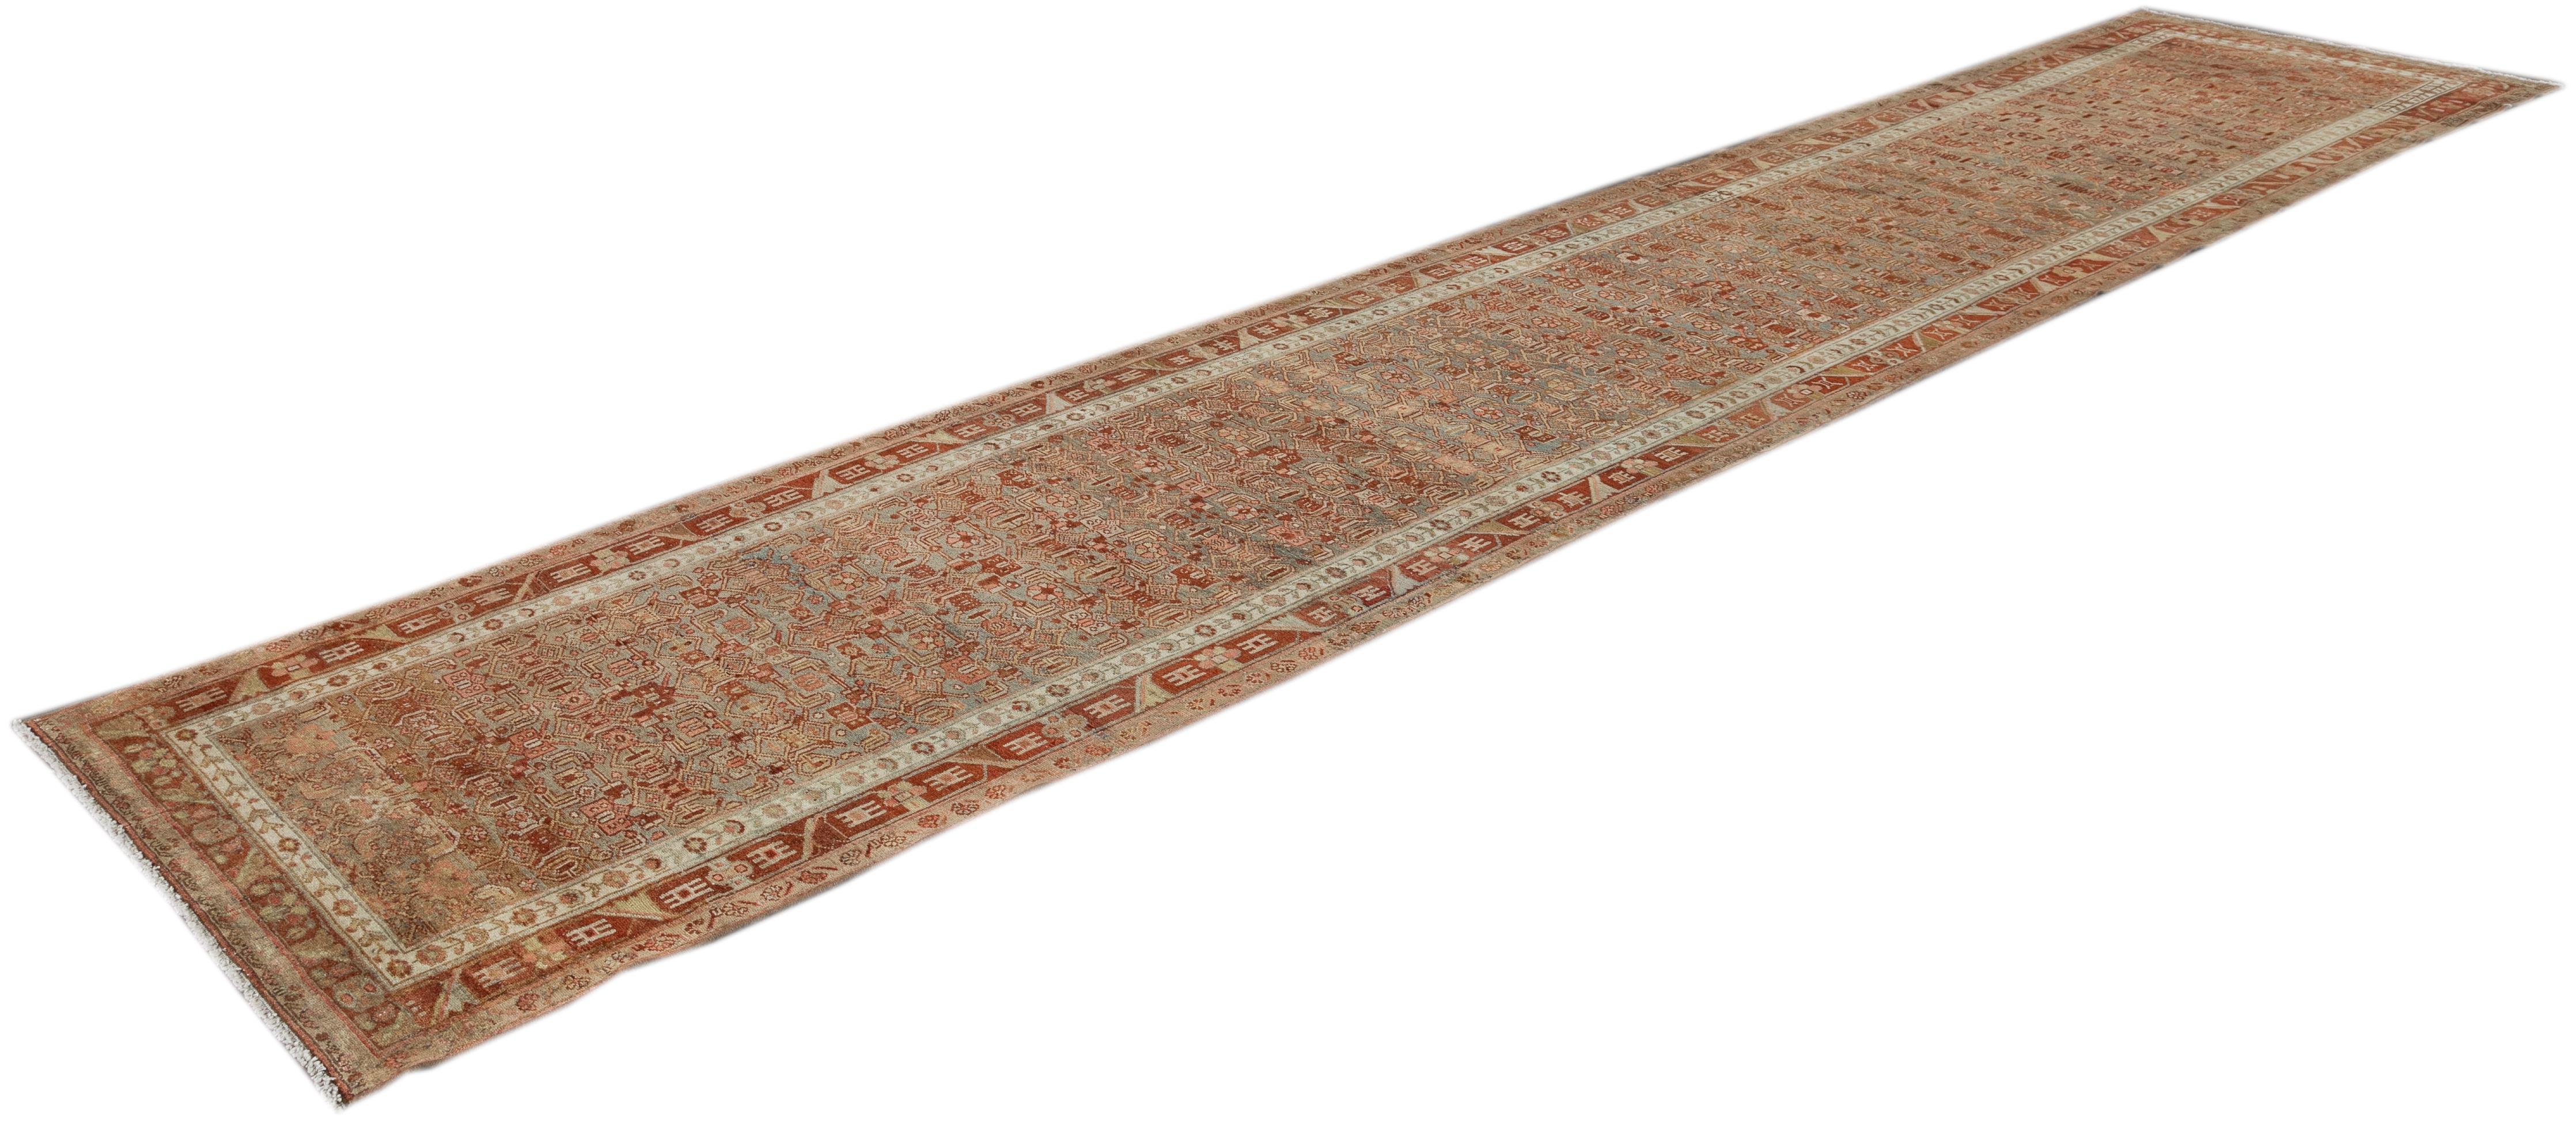 Early 20th Century Antique Malayer Wool Runner Rug For Sale 3